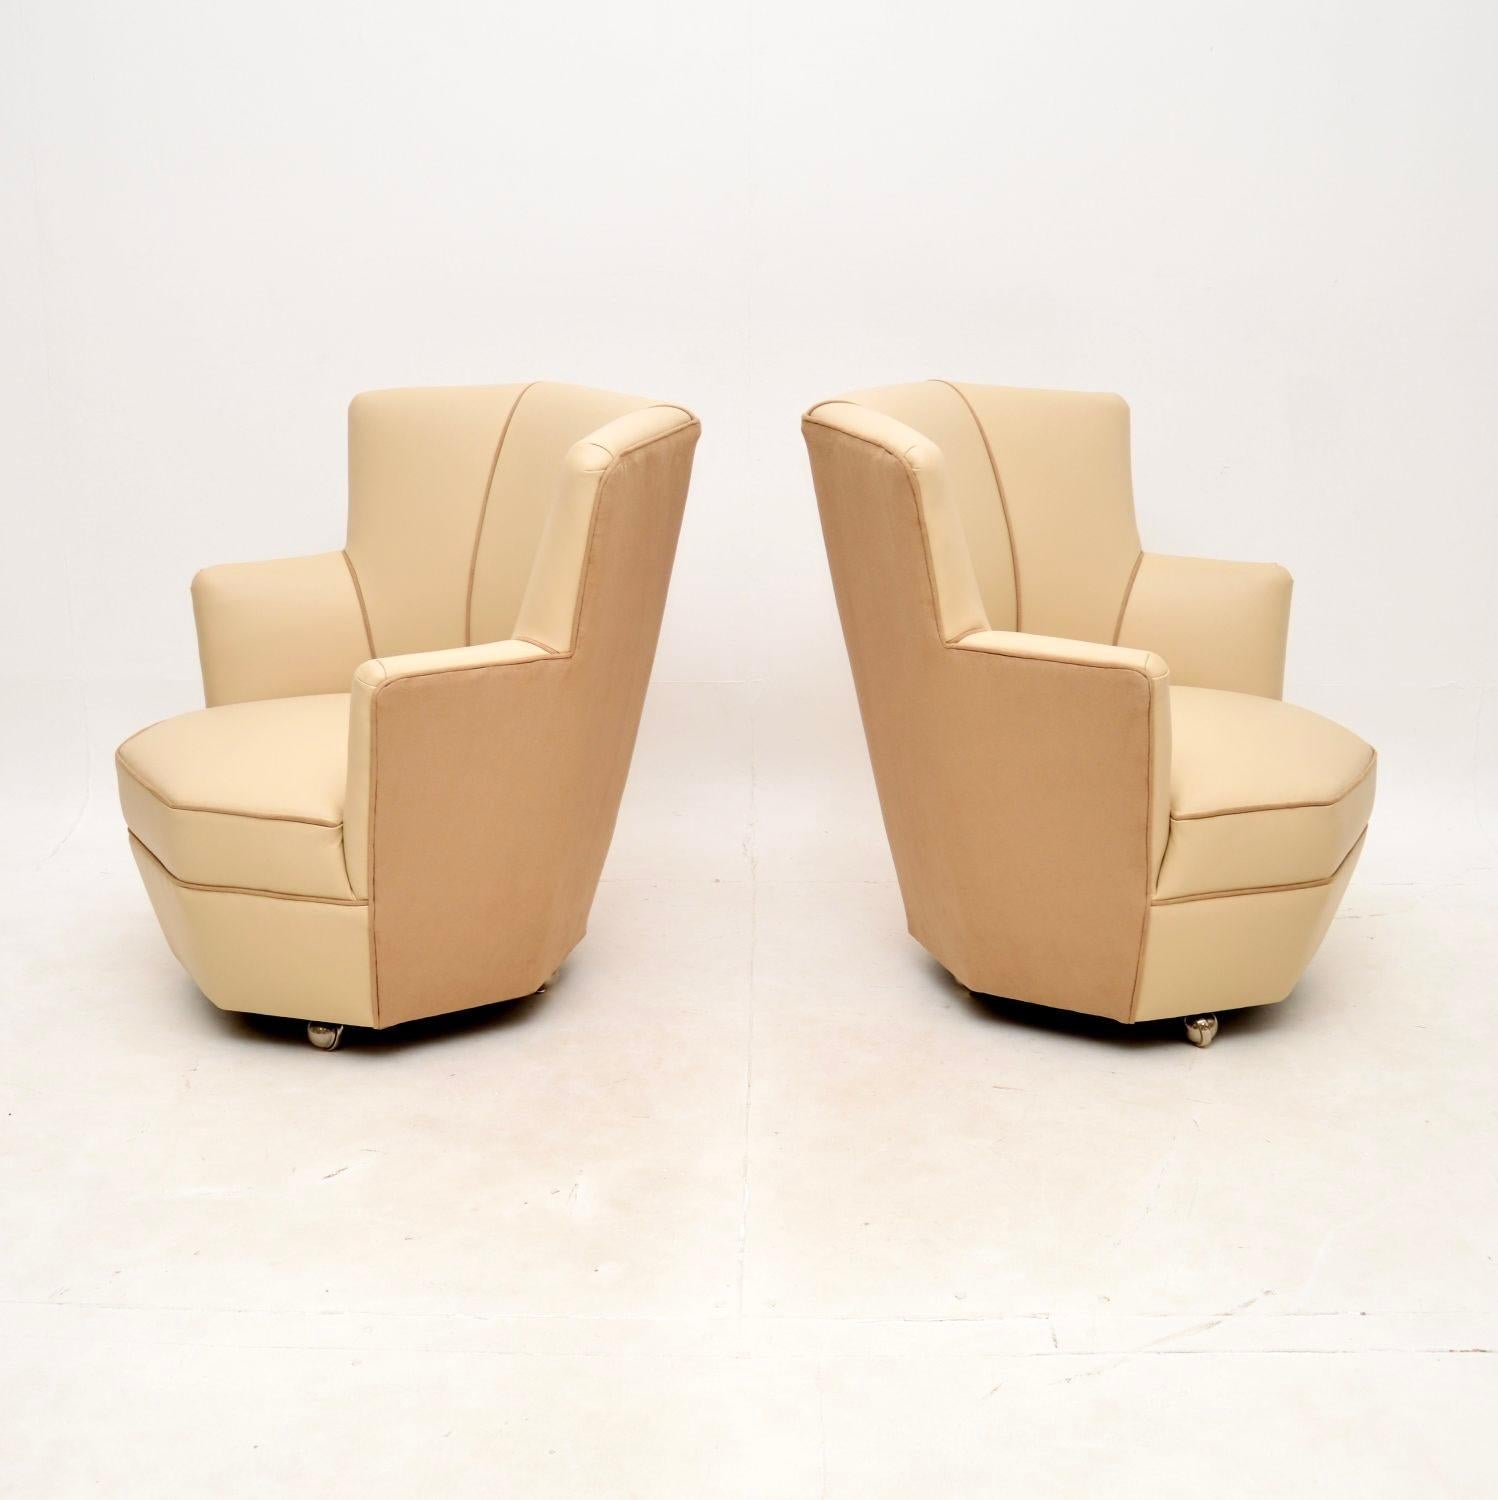 British Pair of Art Deco Leather and Suede Cocktail Armchairs